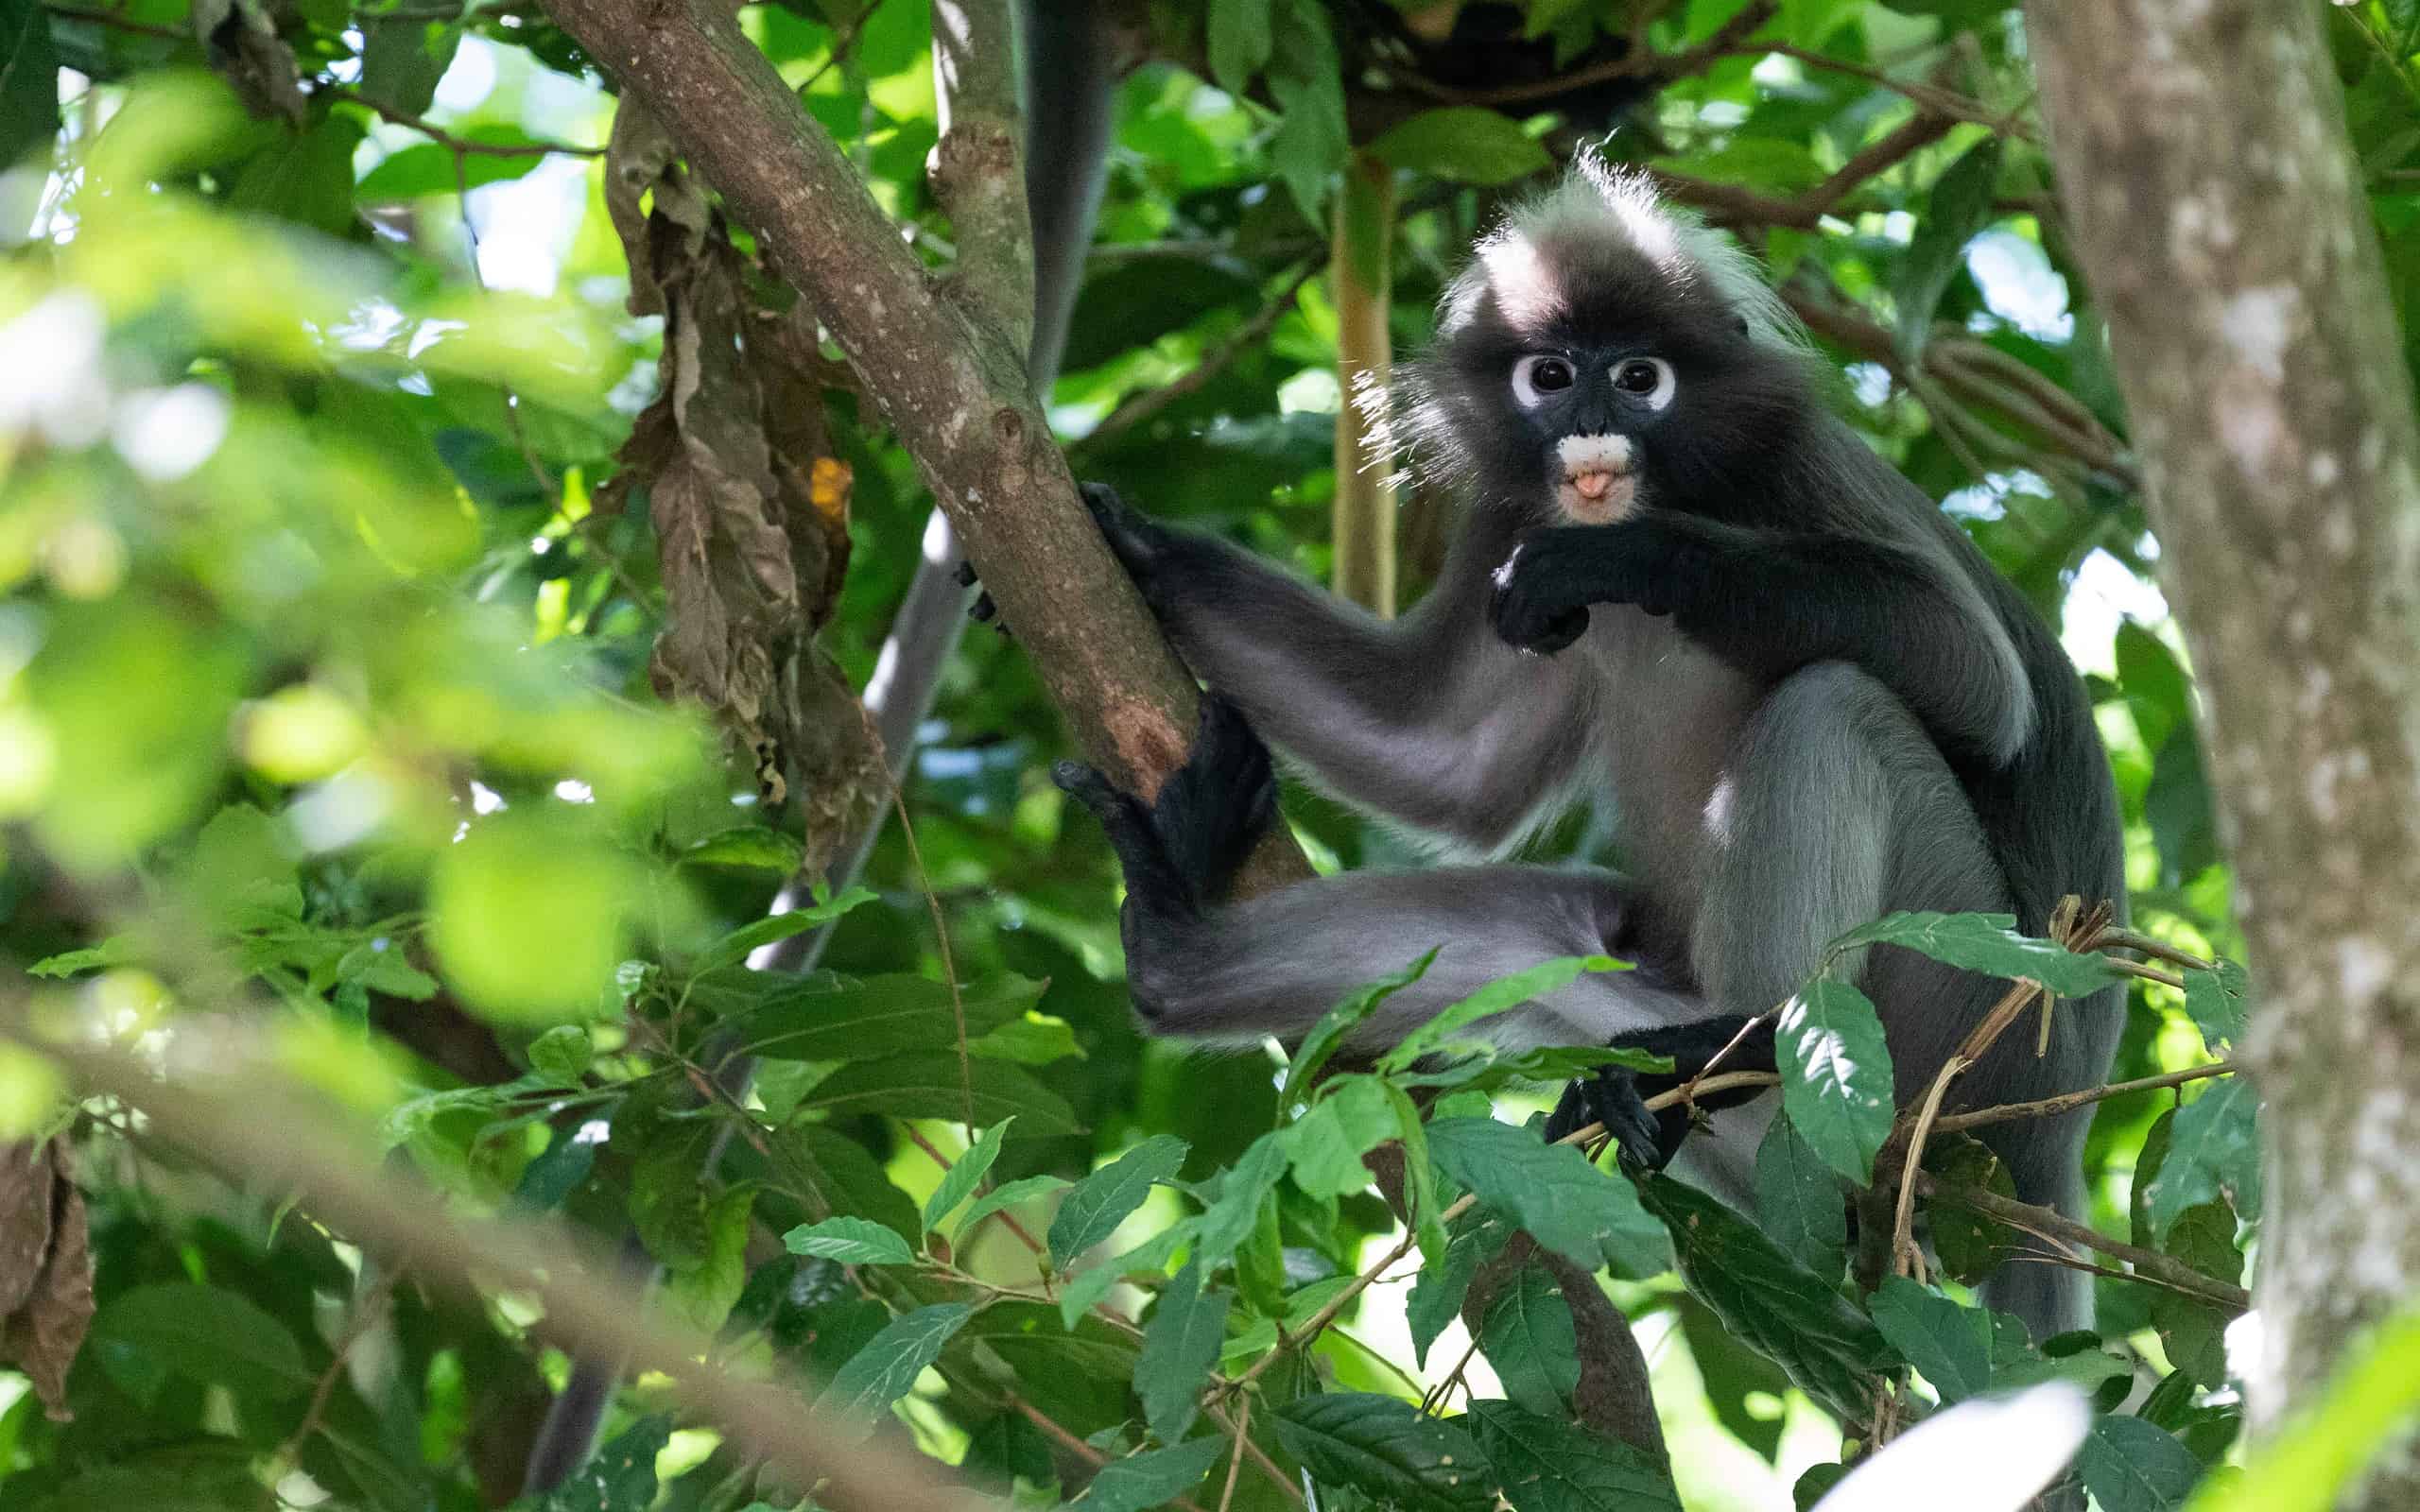 Dusky leaf monkey (also called spectacled langur) in a tree in Malacca, Malaysia.